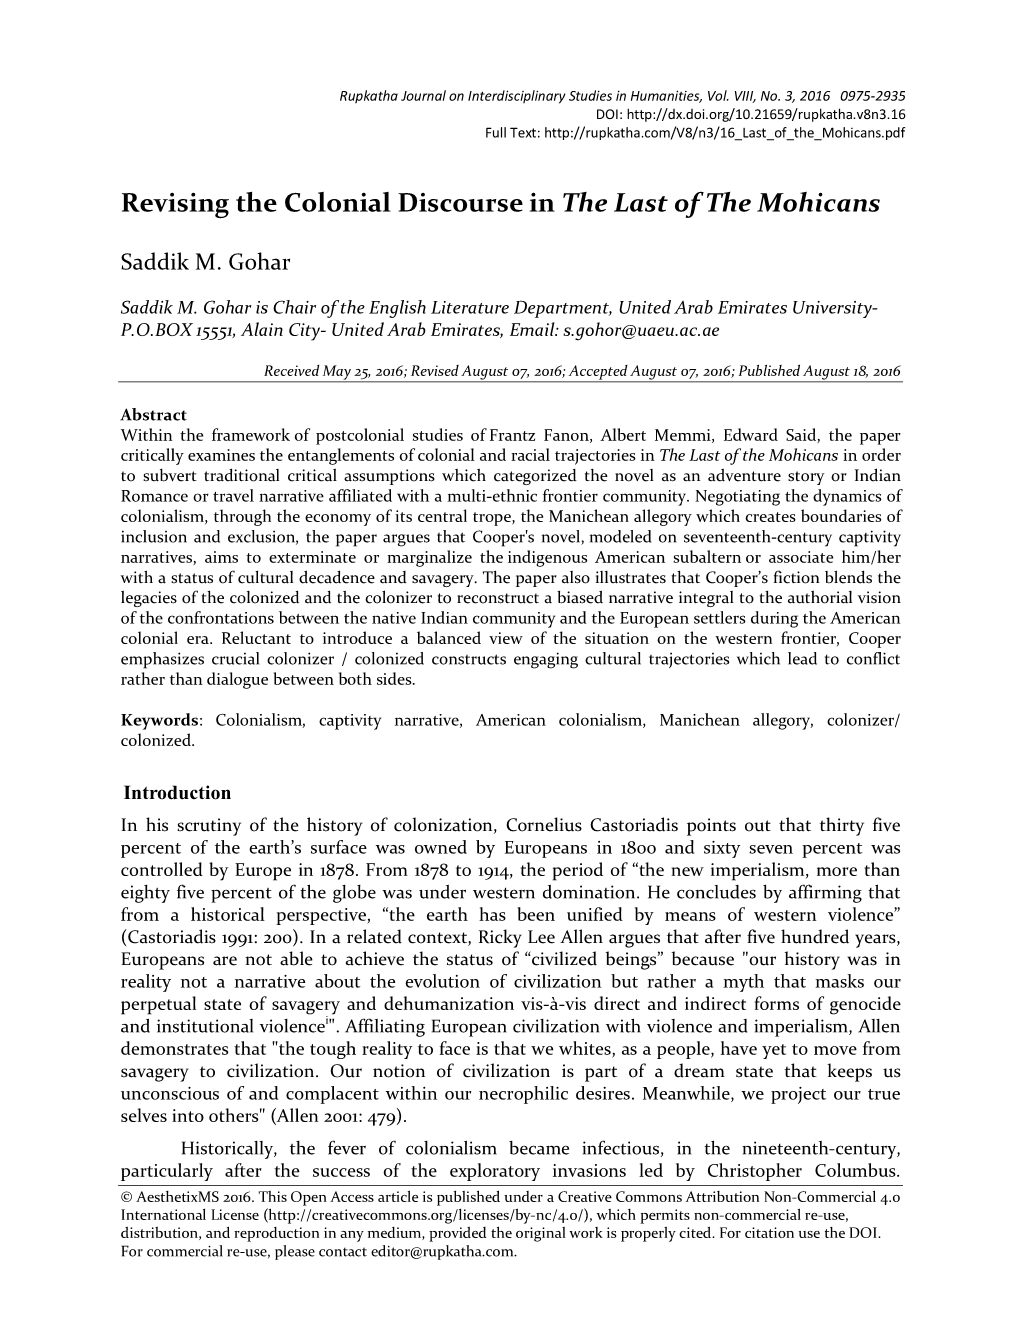 Revising the Colonial Discourse in the Last of the Mohicans